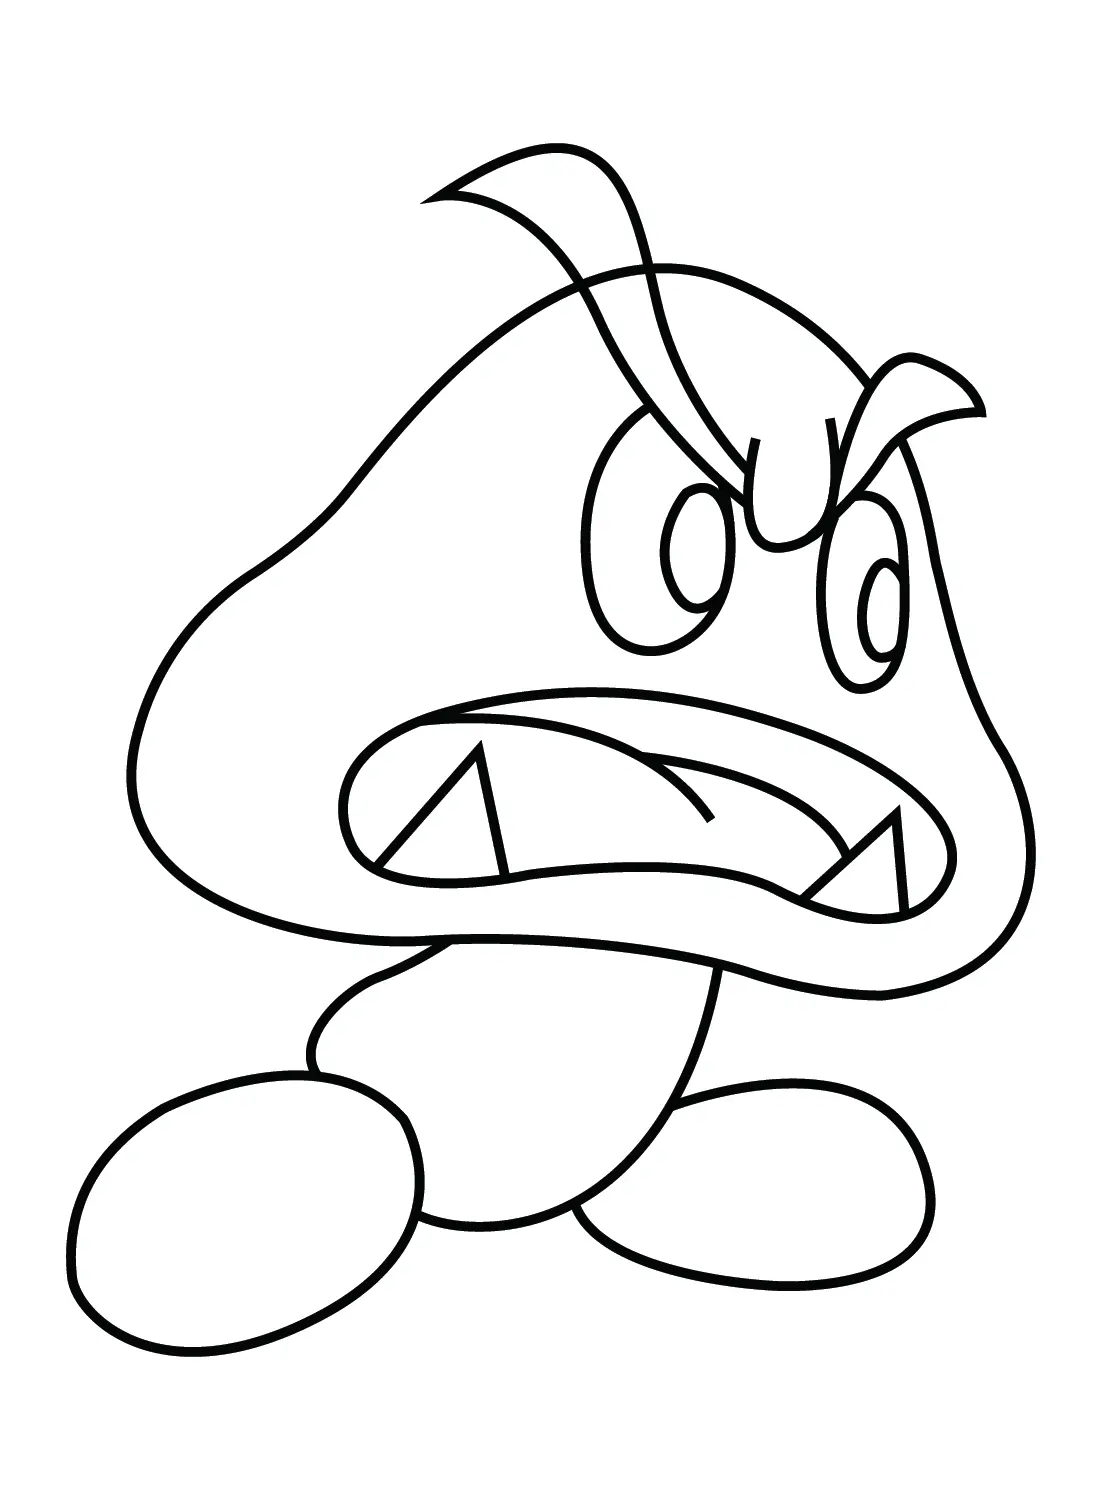 Goomba Coloring Pages